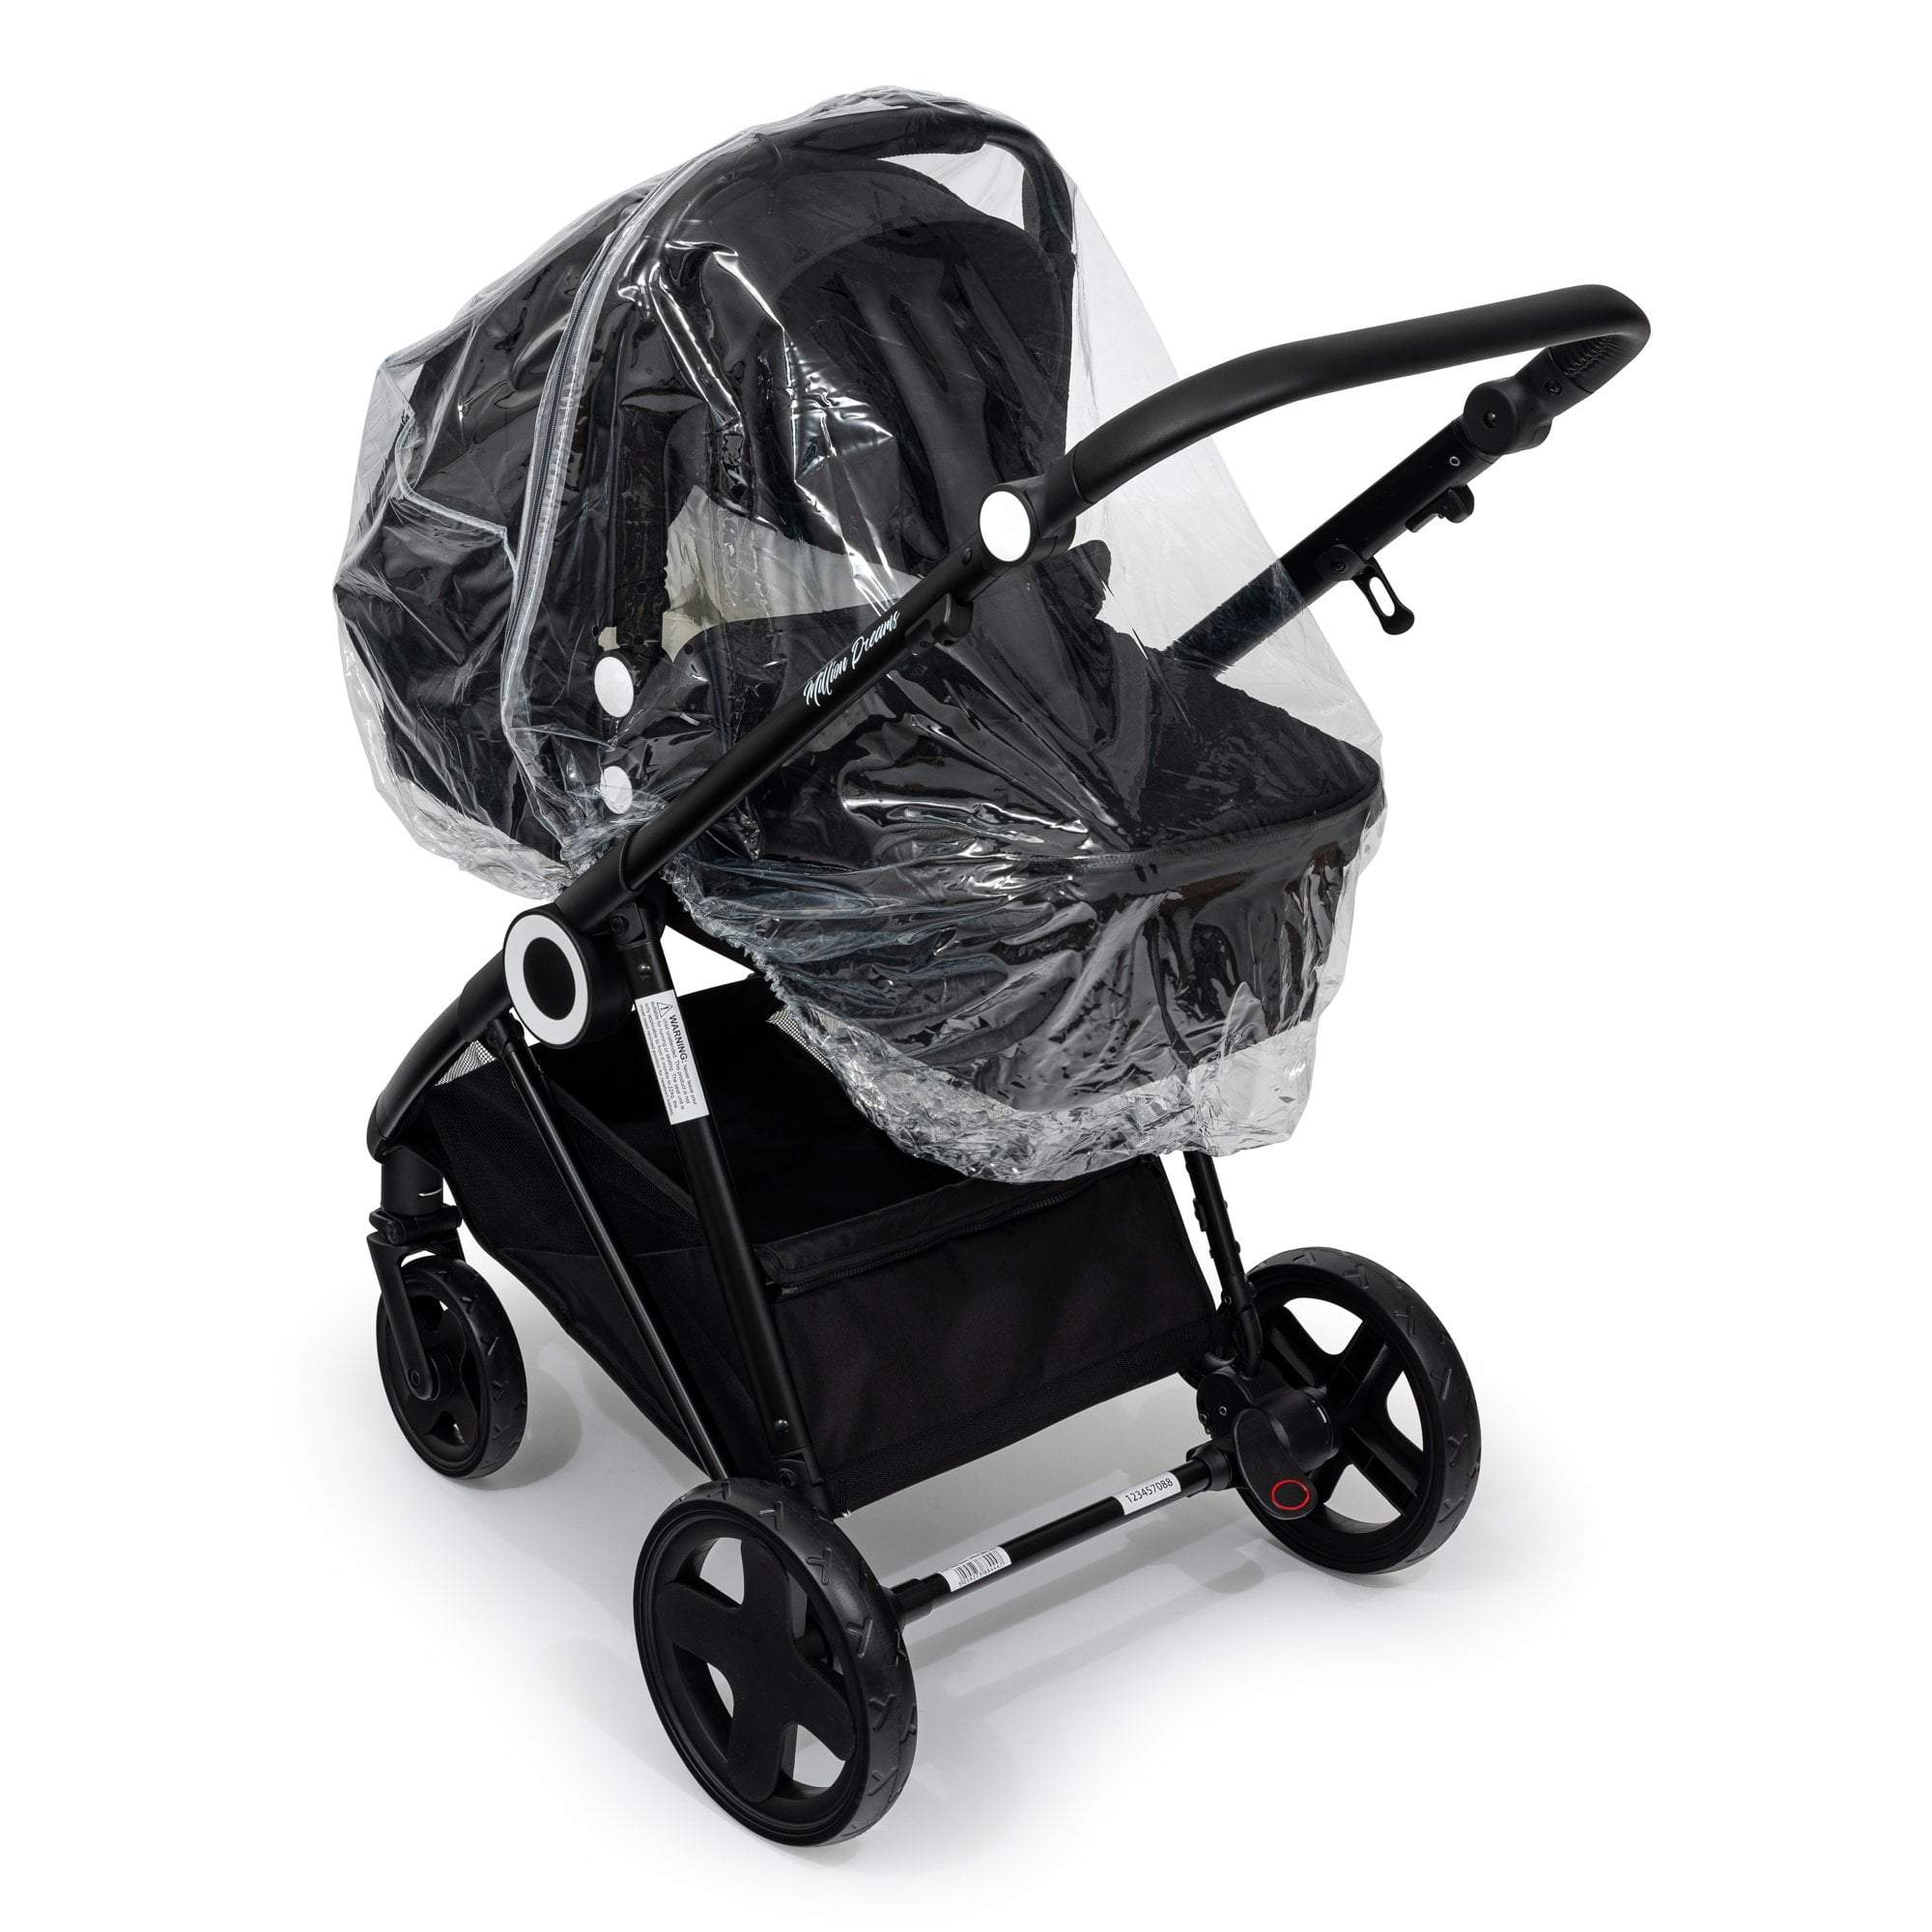 Carrycot Raincover Compatible With DoBuggy - Fits All Models - For Your Little One